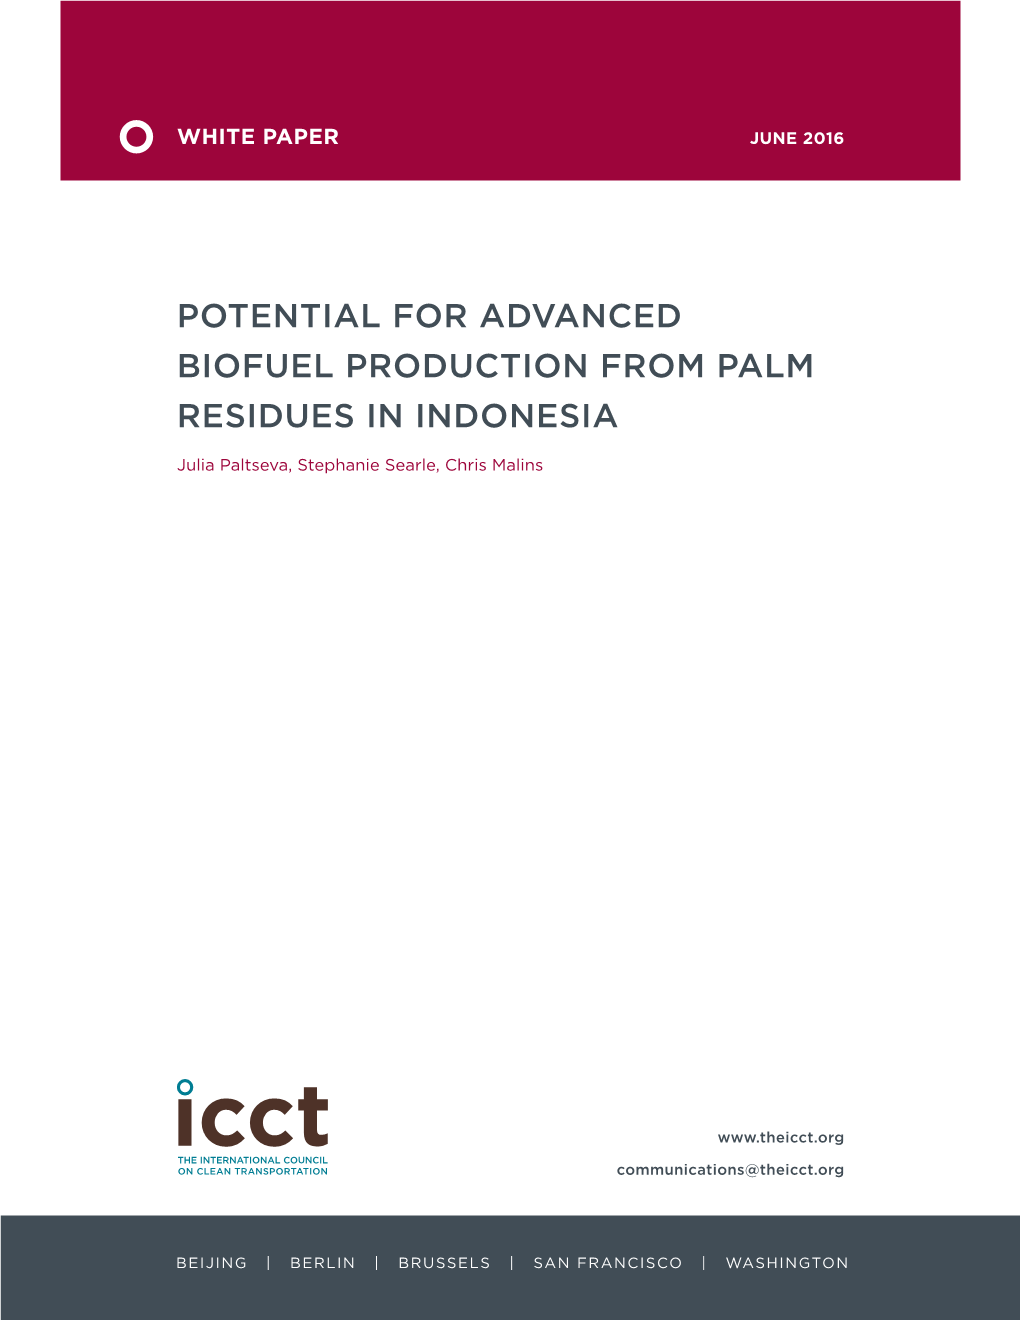 Potential for Advanced Biofuel Production from Palm Residues in Indonesia